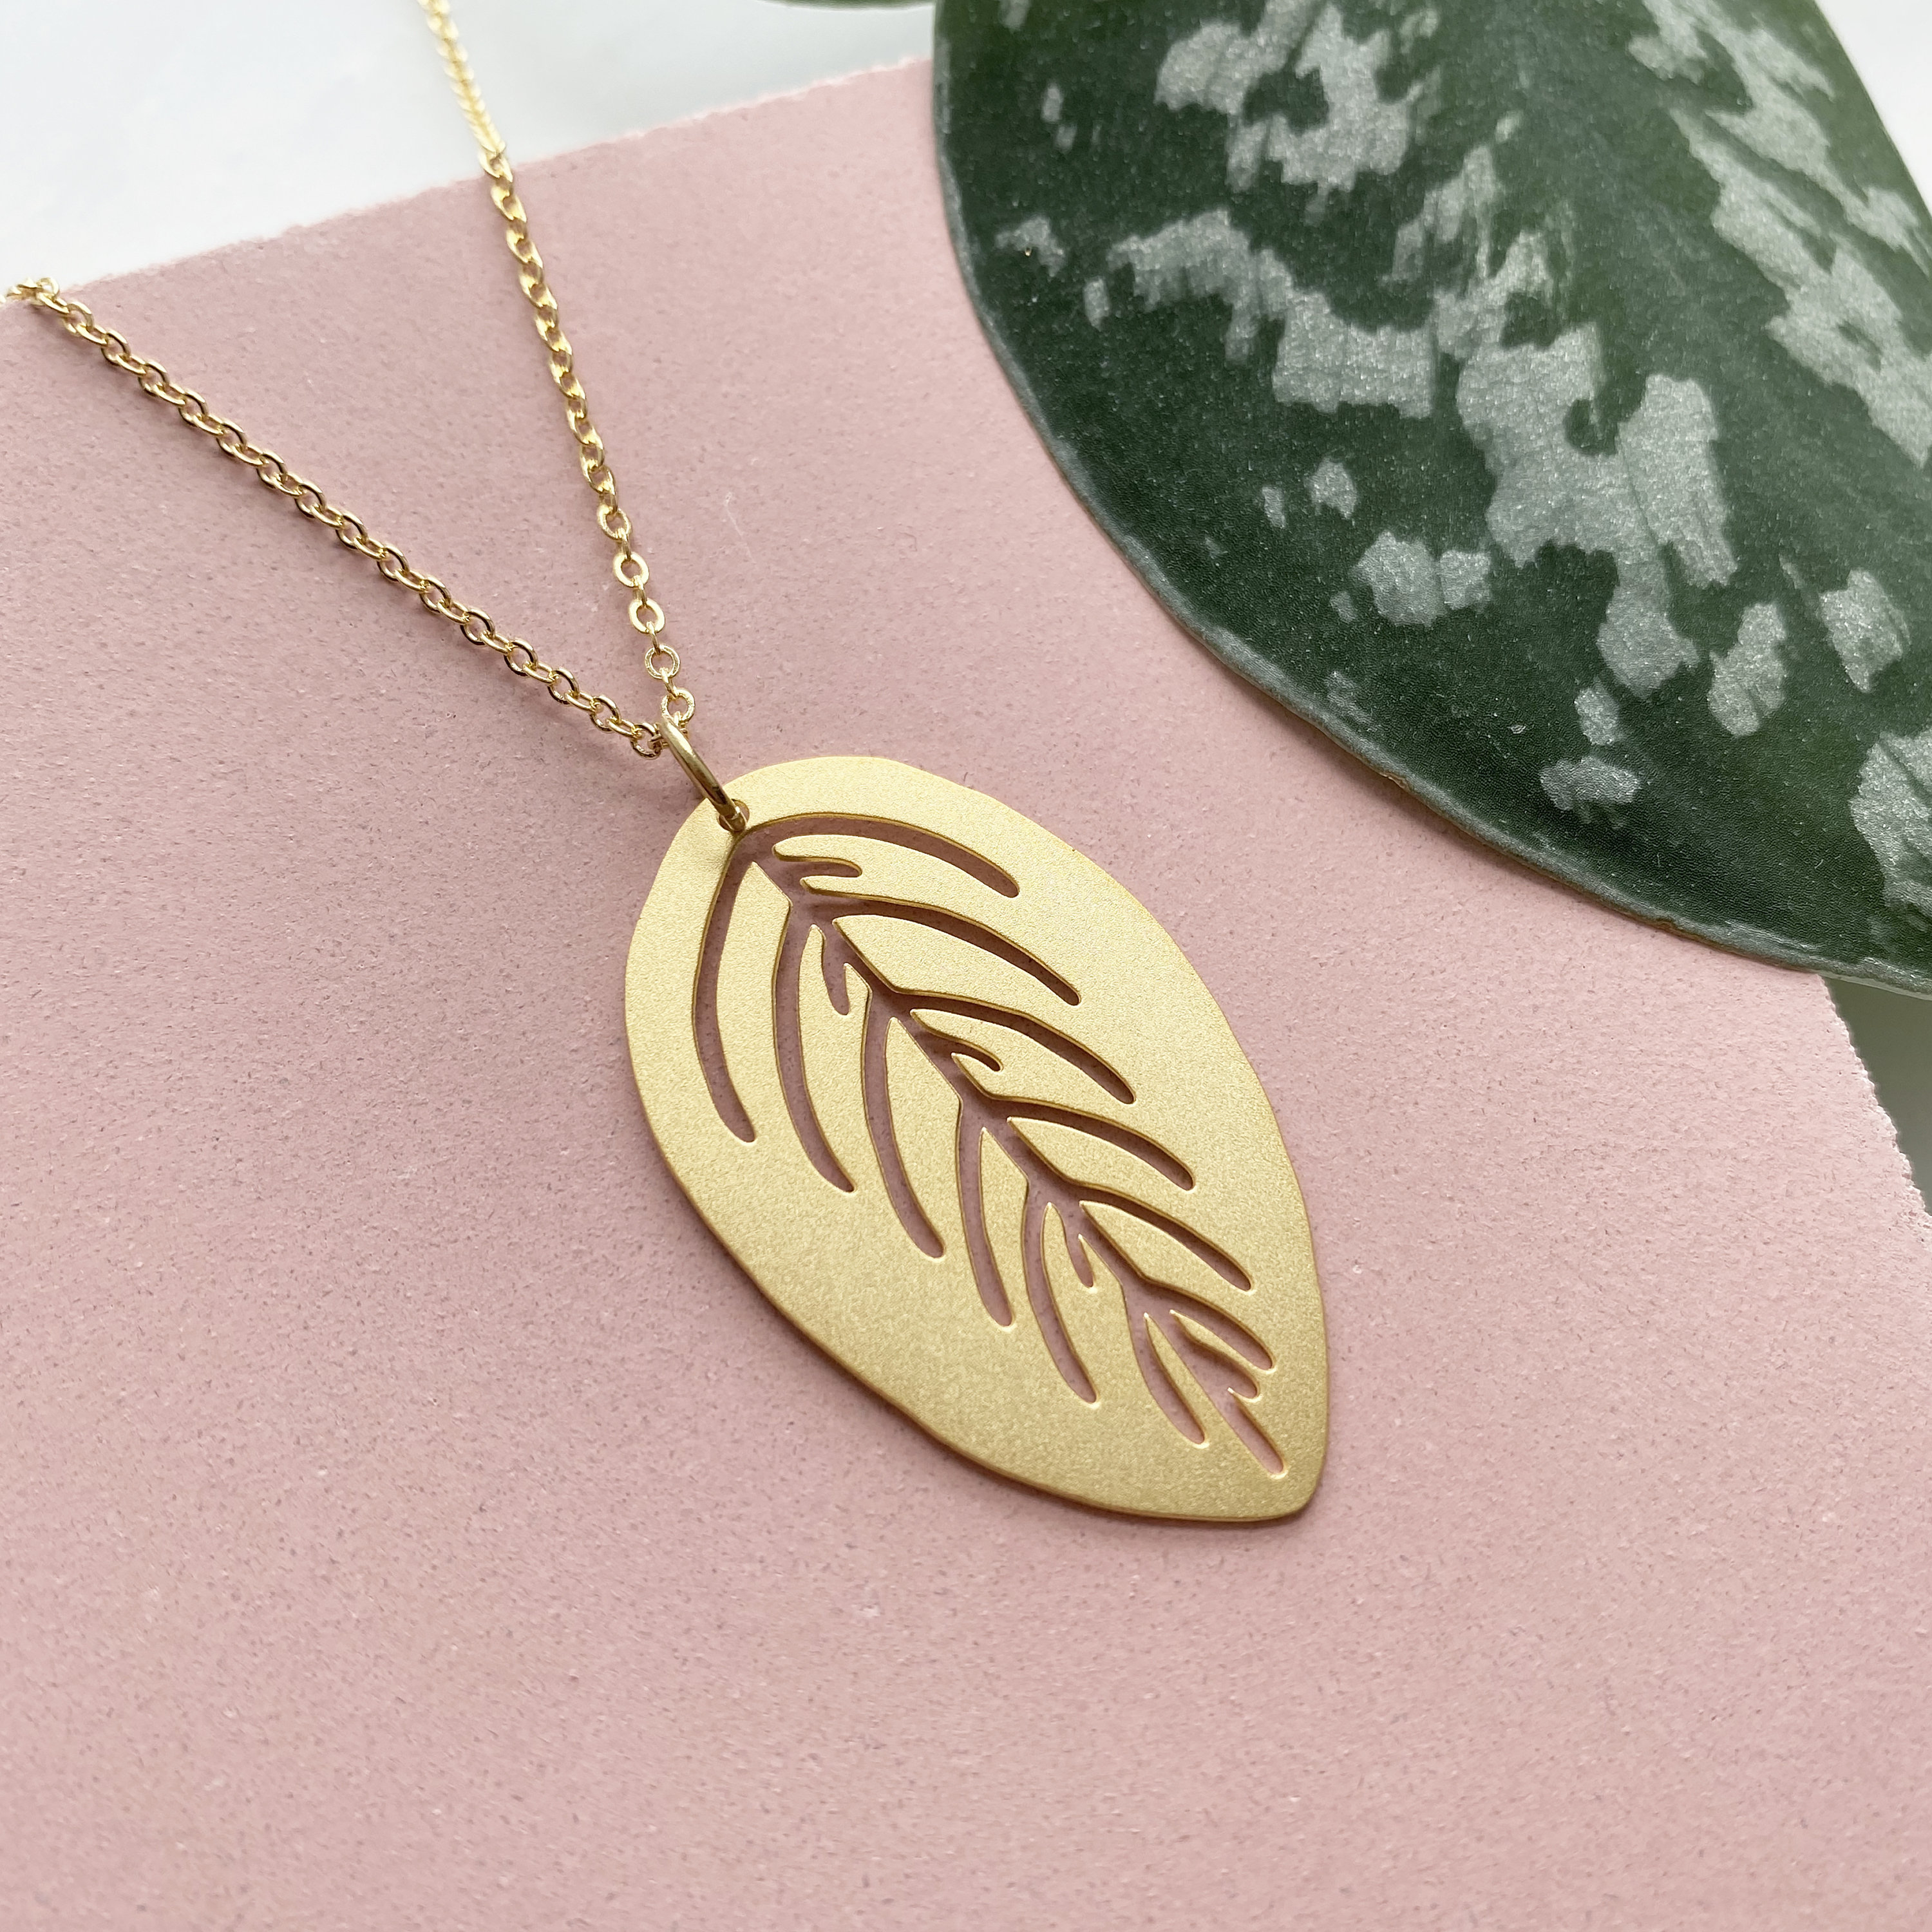 Simple Leaf Pendant - Tropical Gold Necklace Gift For Her Plant Jewellery Maranta